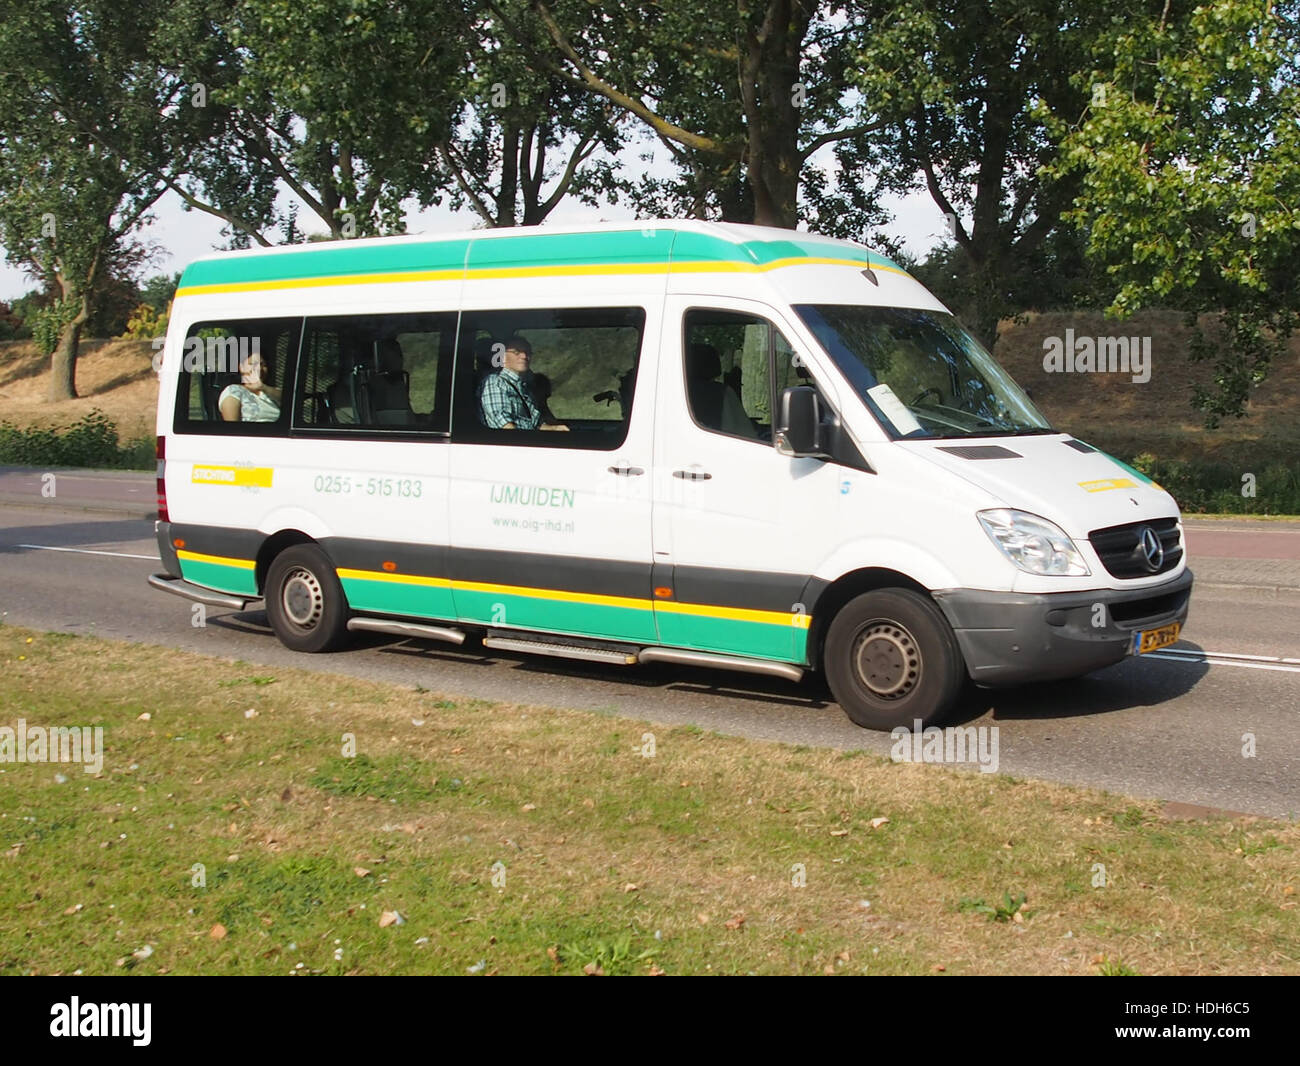 Mercedes Van High Resolution Stock Photography and Images - Alamy